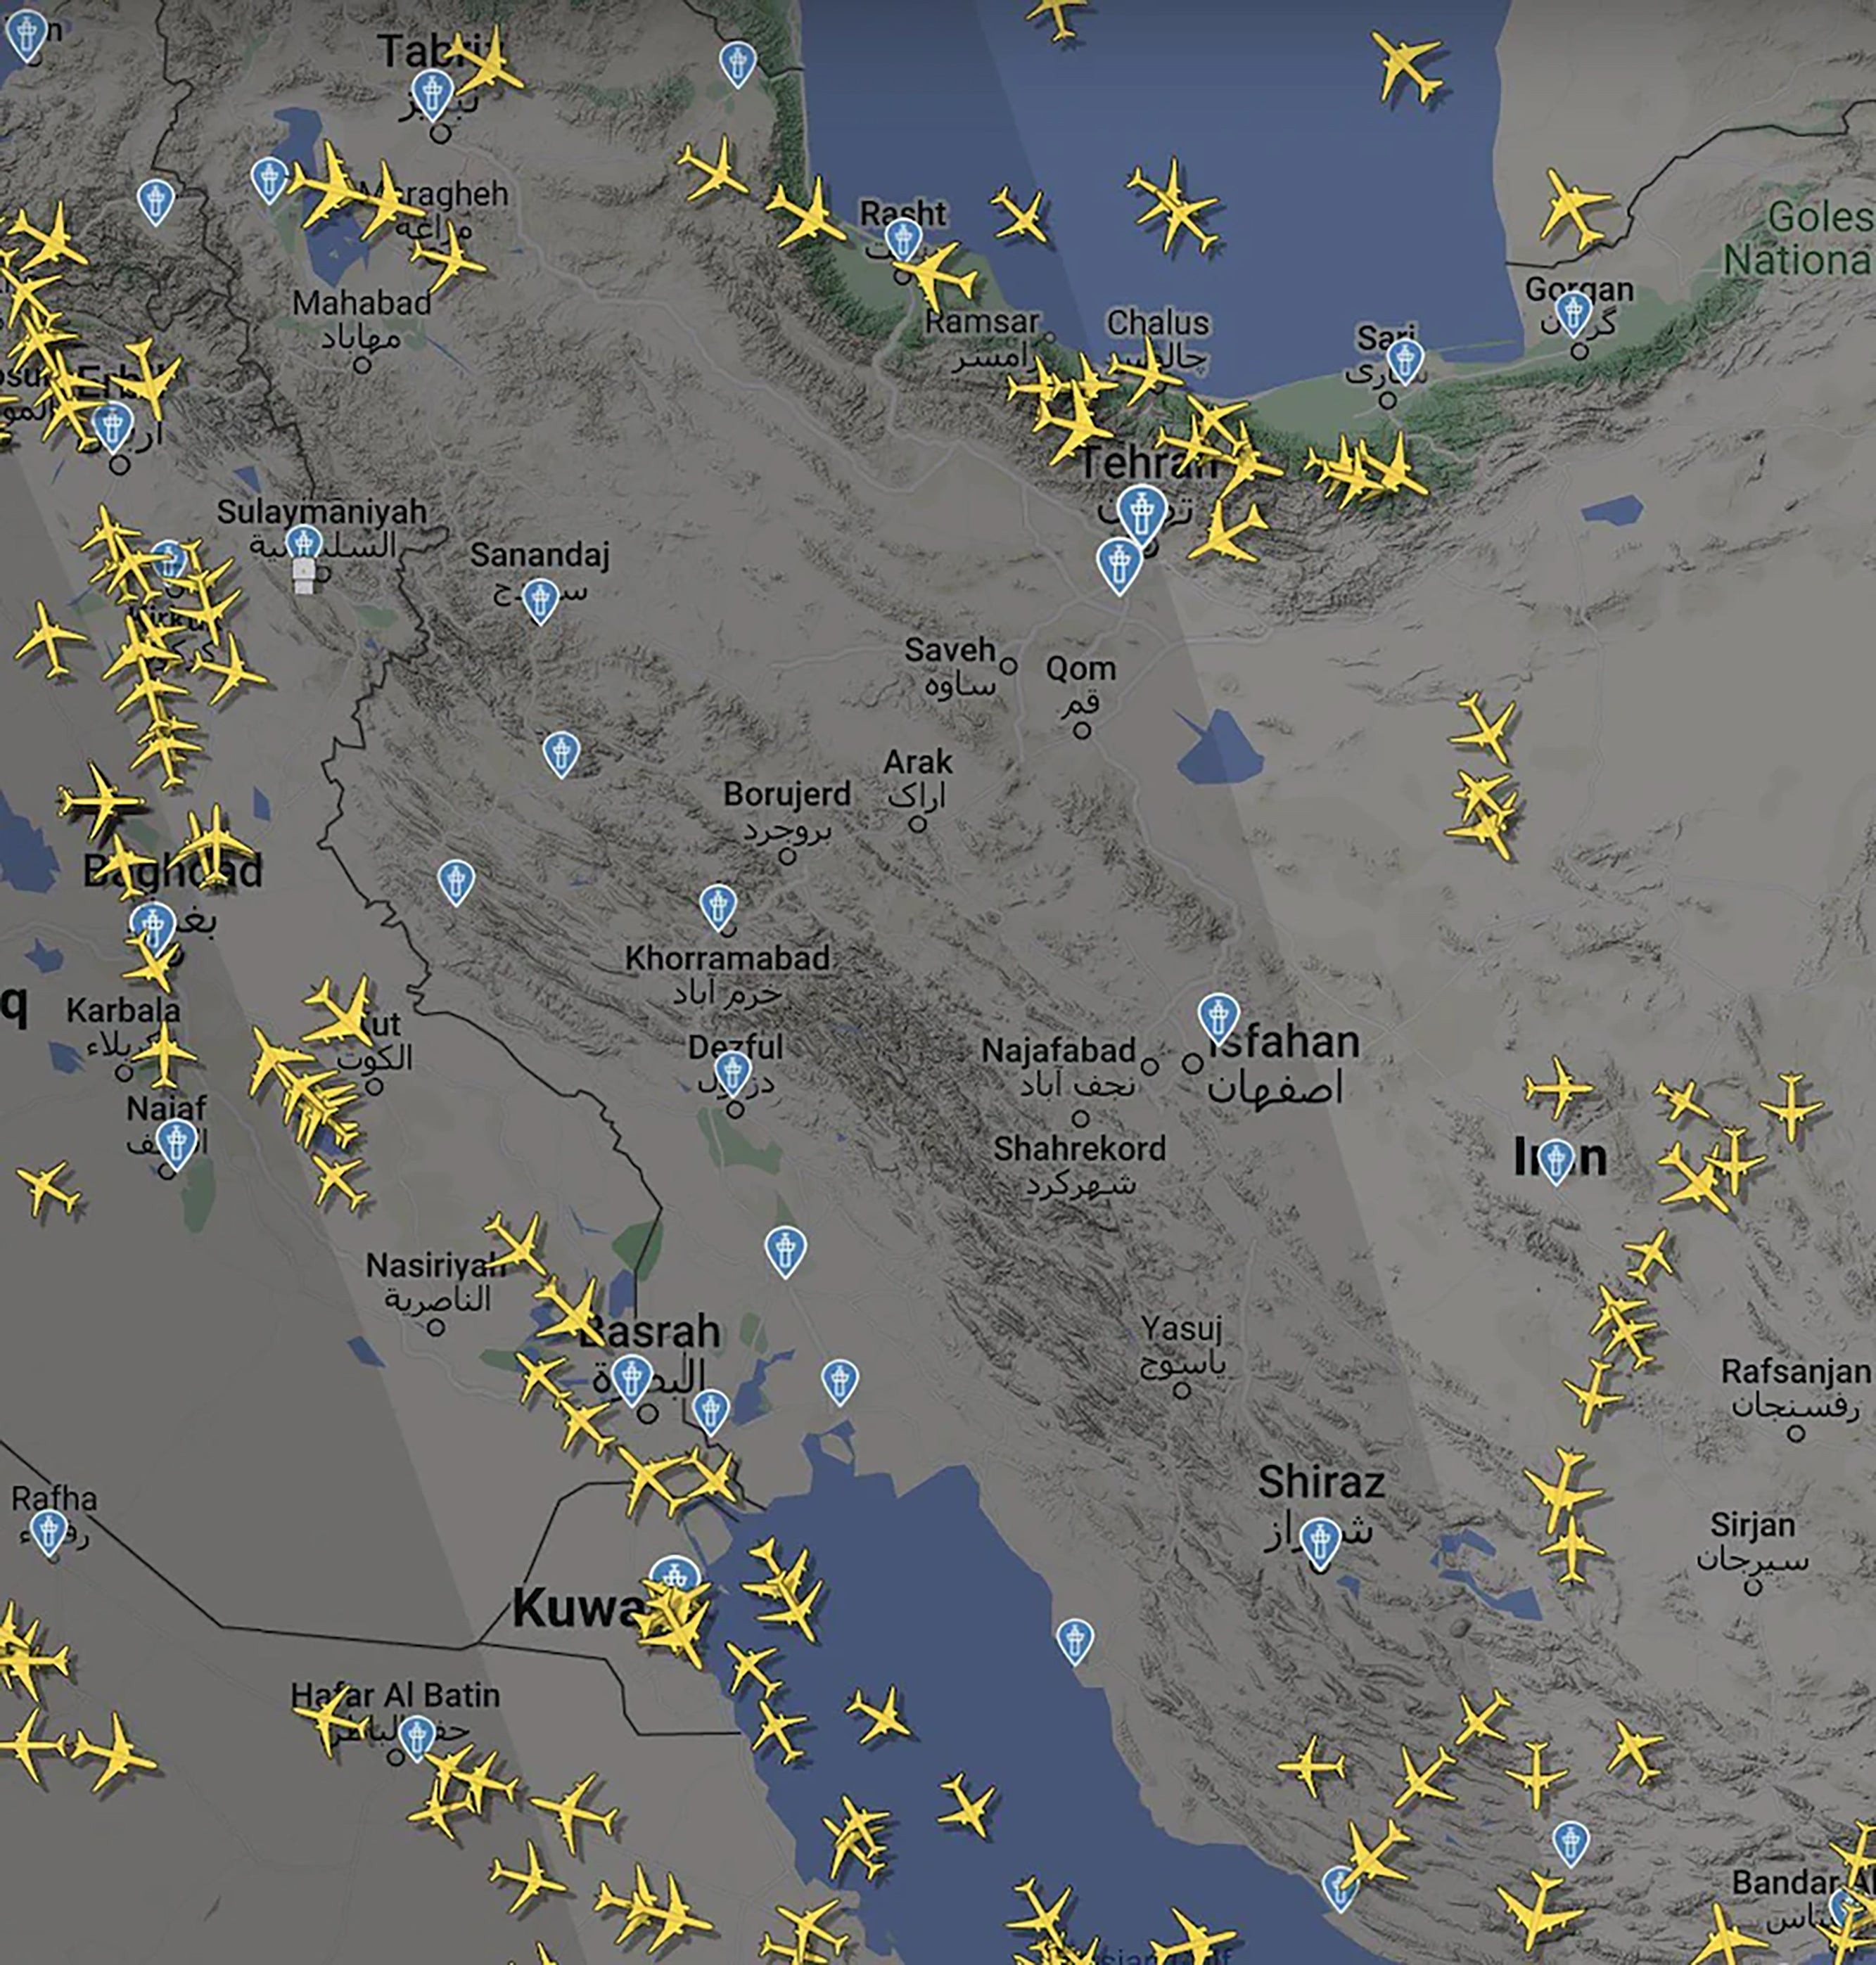 Flights in Tehran, Isfahan and Shiraz were suspended for over two hours